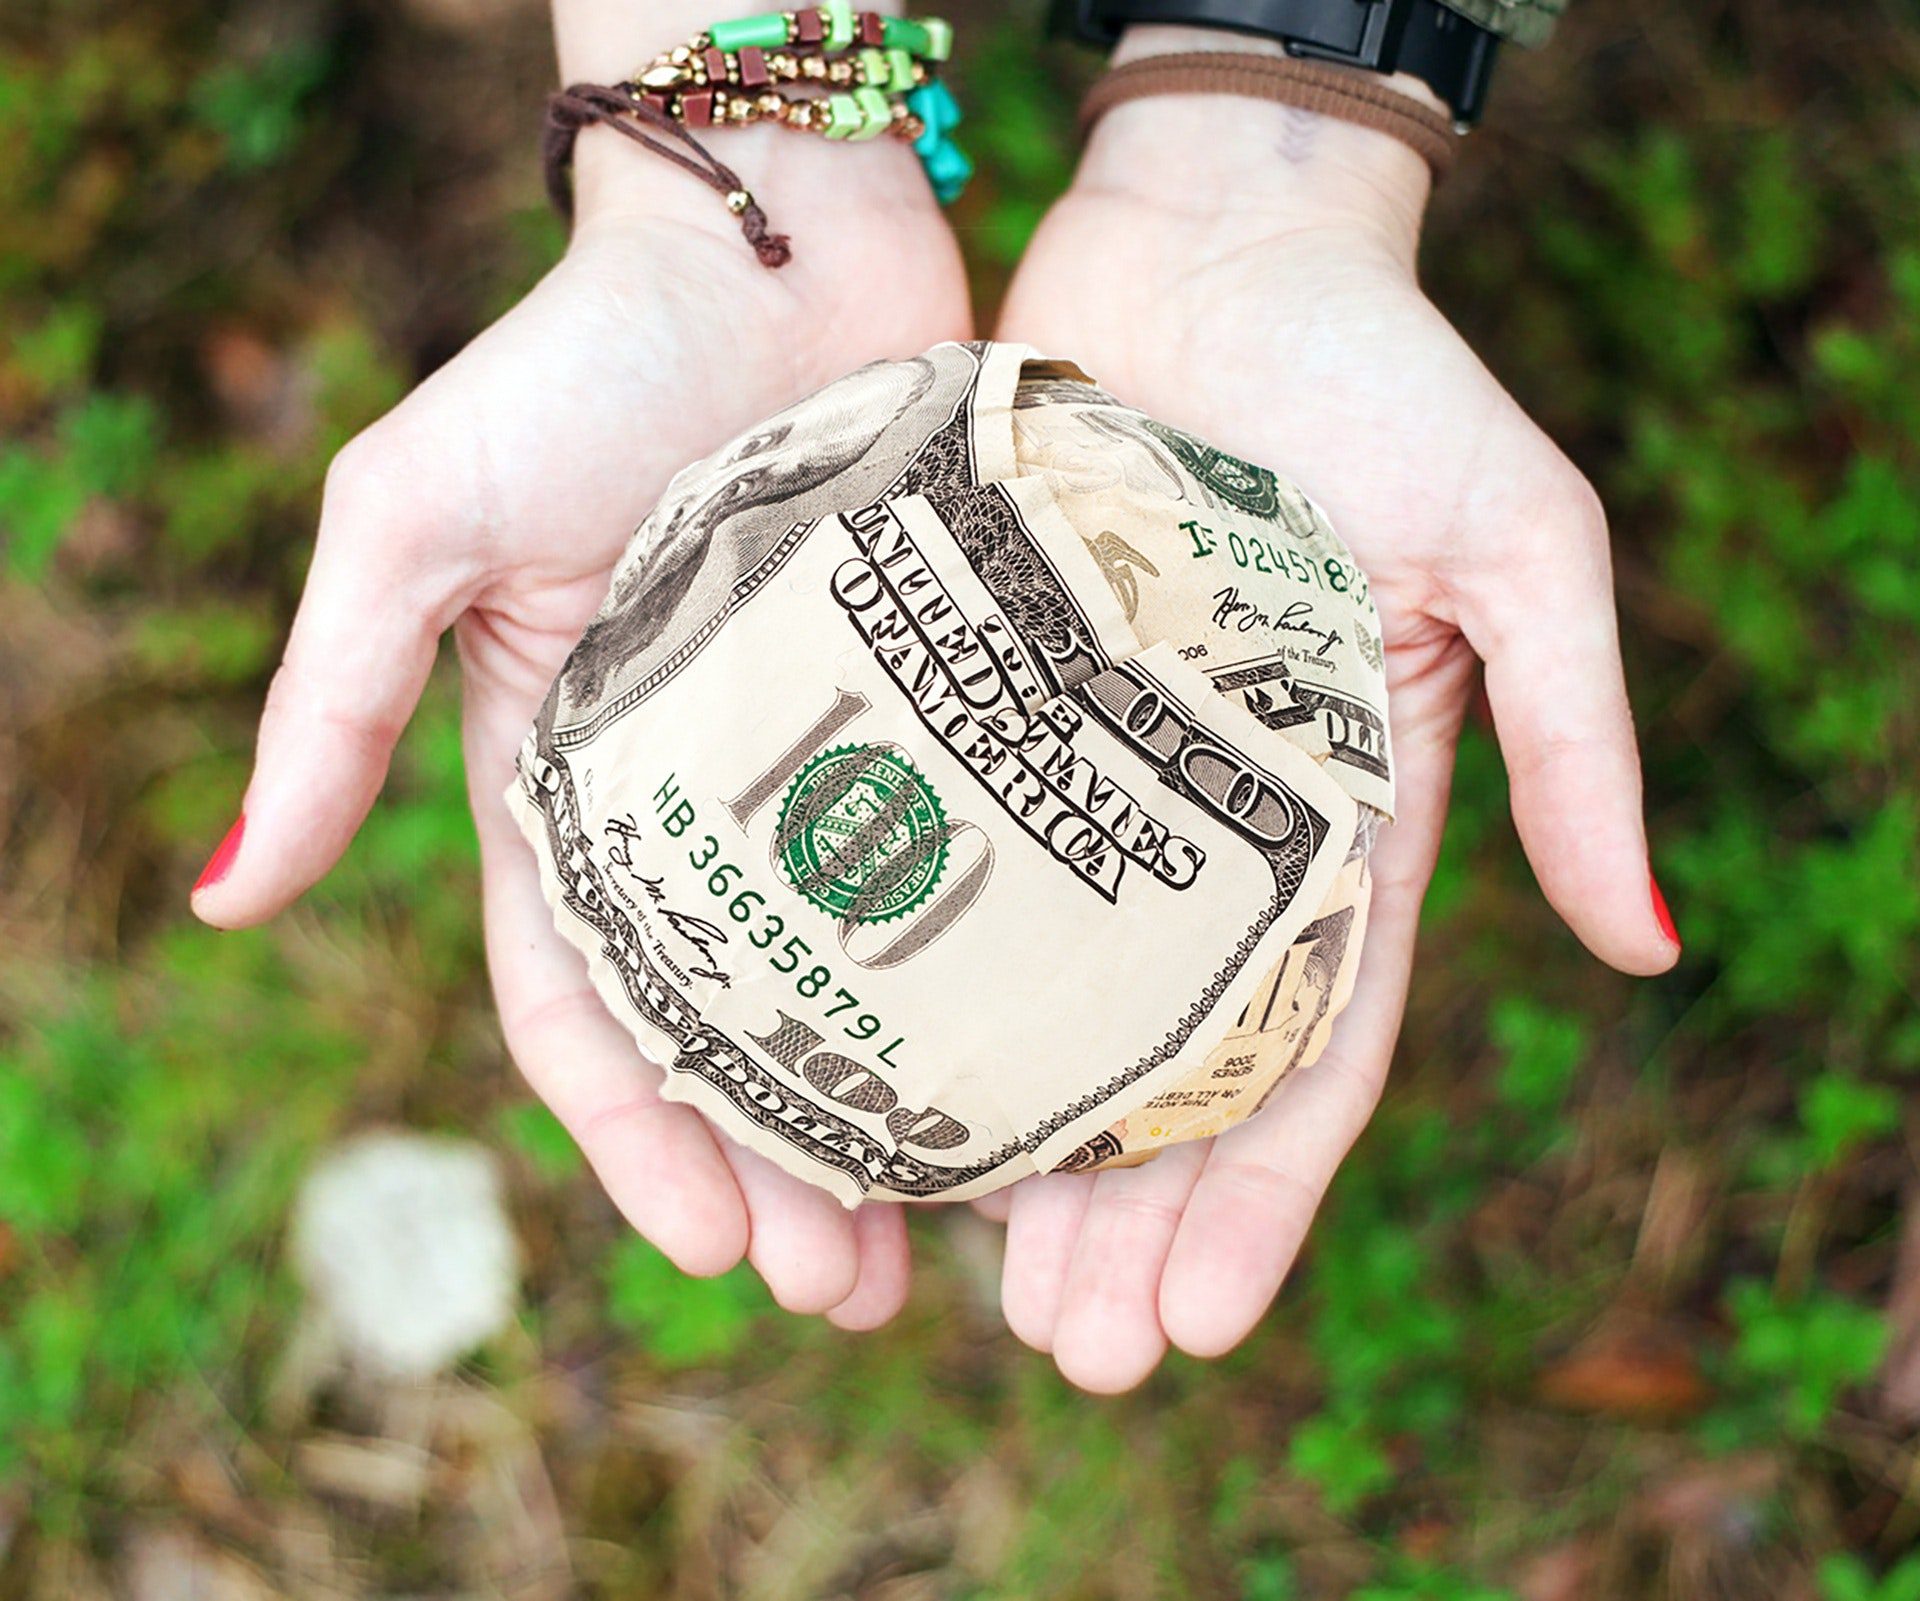 Two hands holding a ball of money with a 100 dollar bill visible